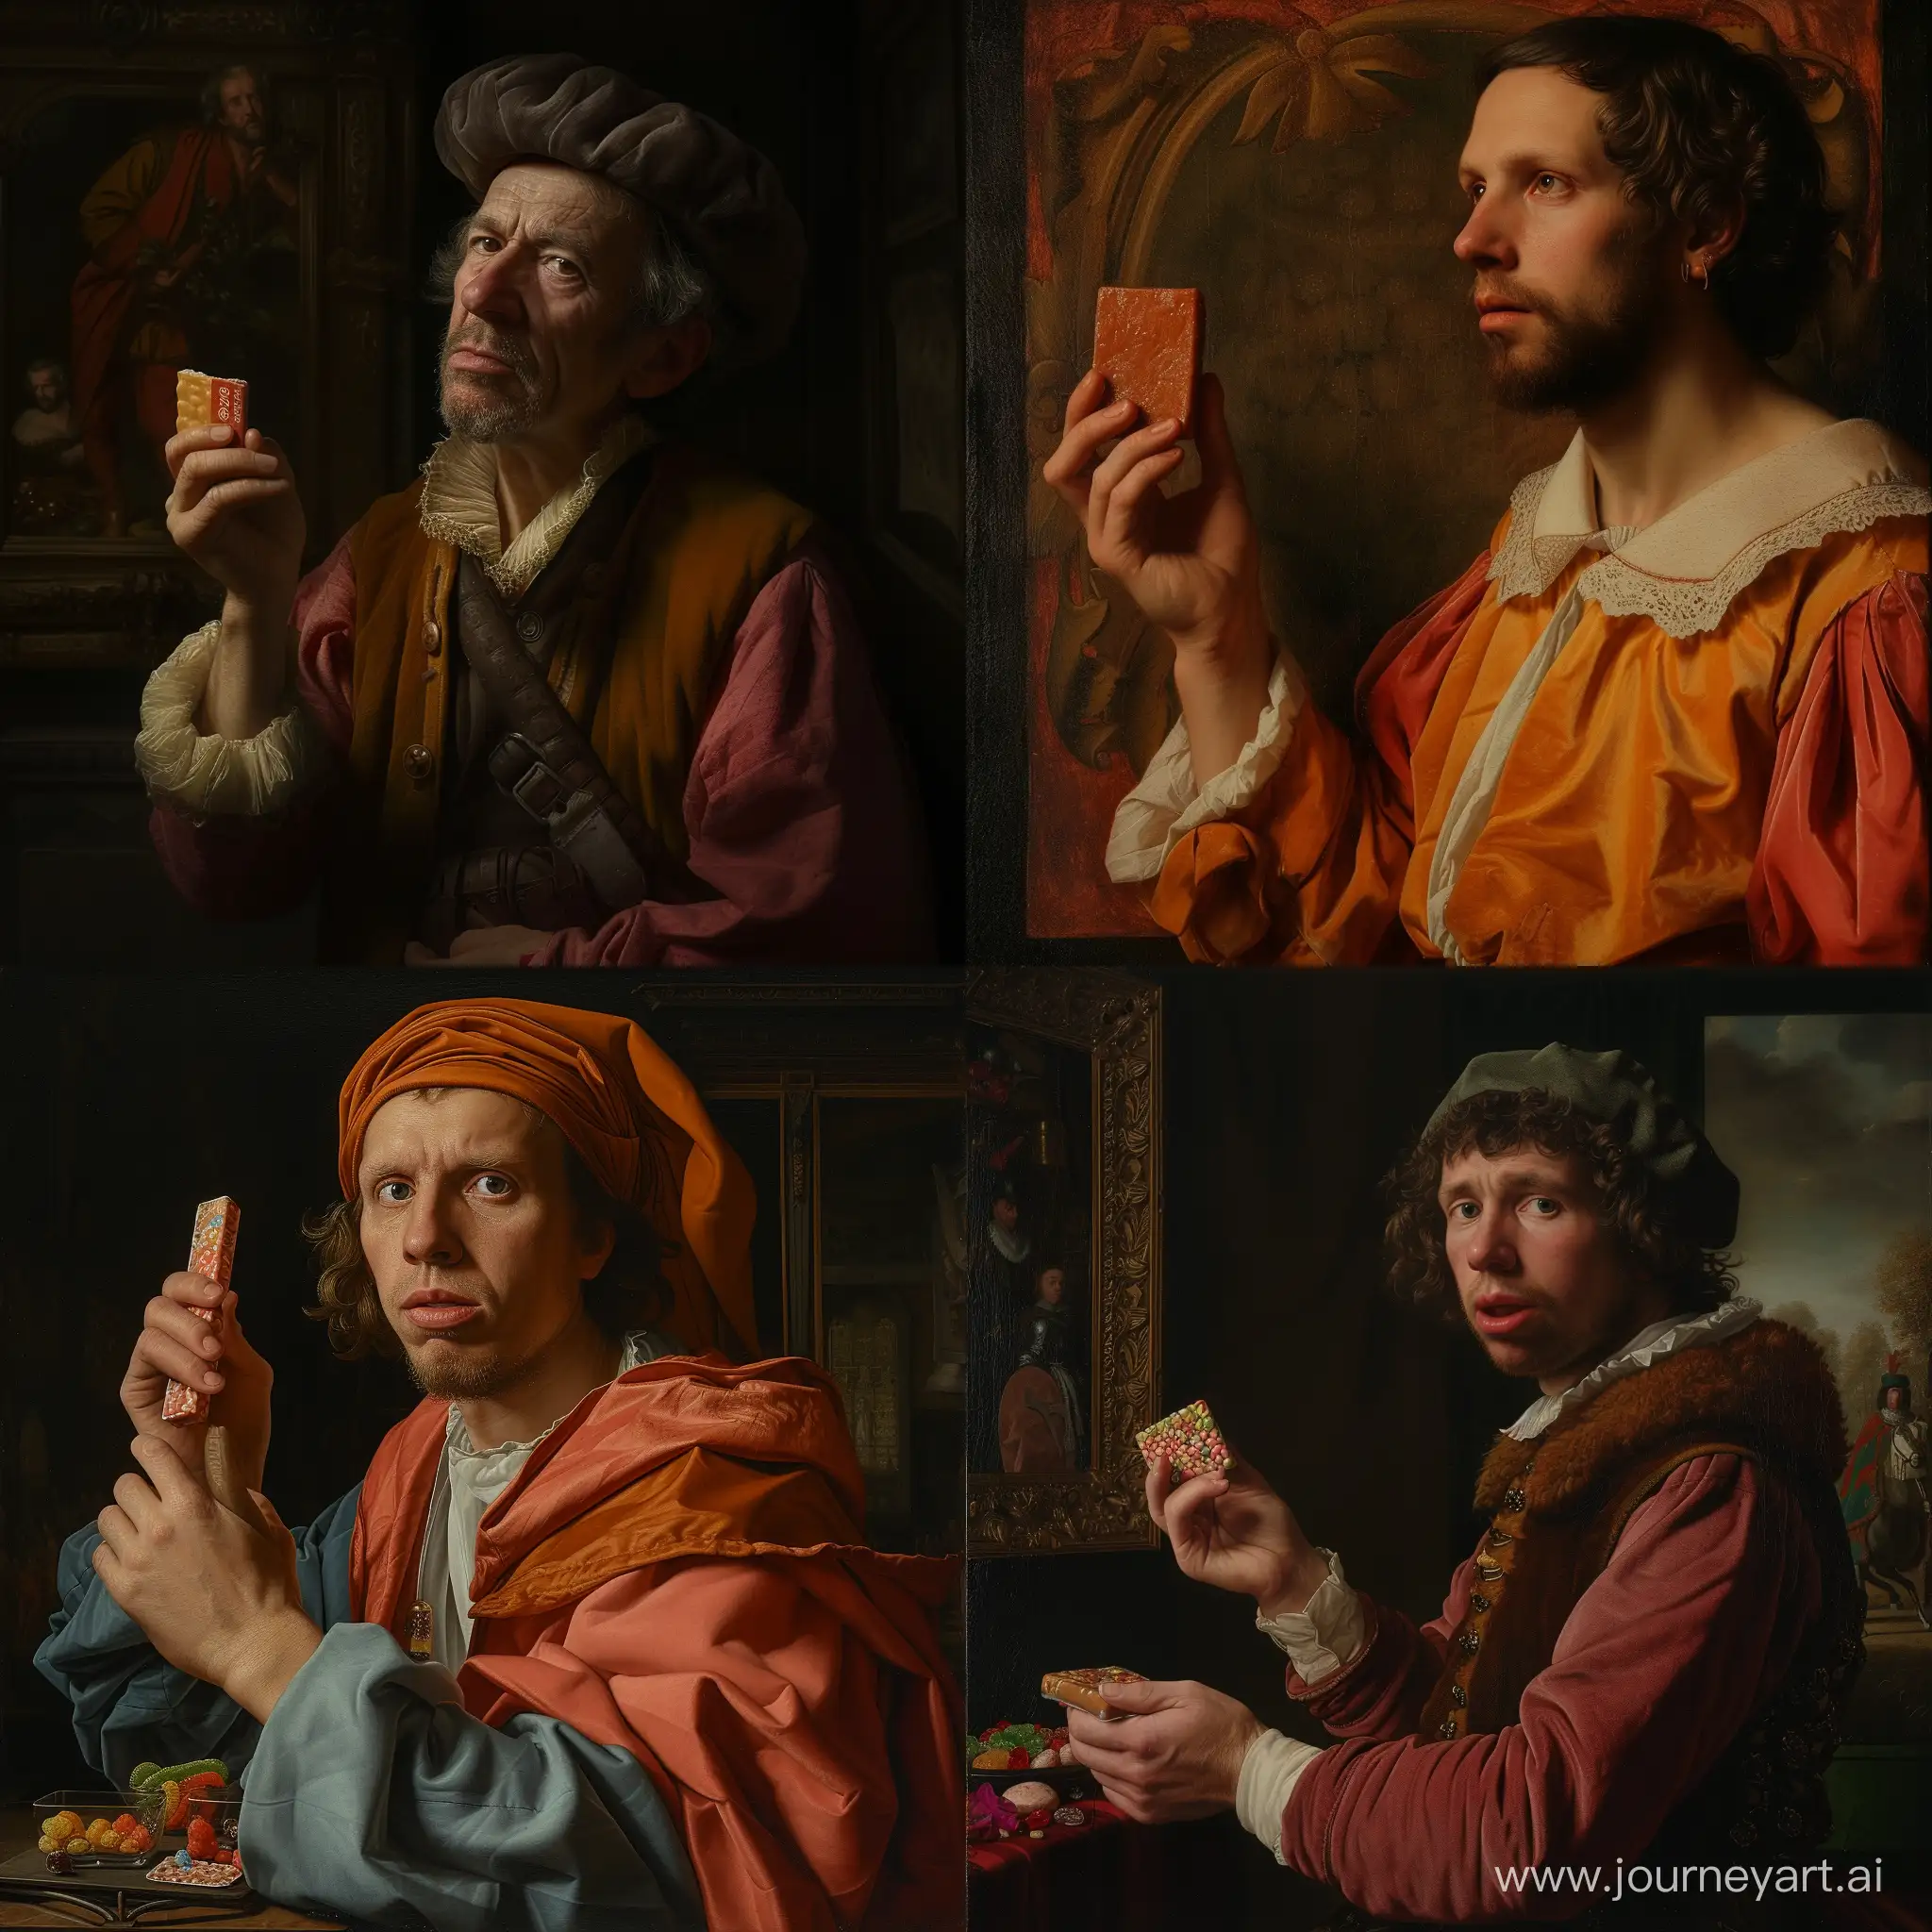 a man holding a candy bar in his hand, a stock photo by Jan Konůpek, polycount, superflat, booru, stockphoto, renaissance painting